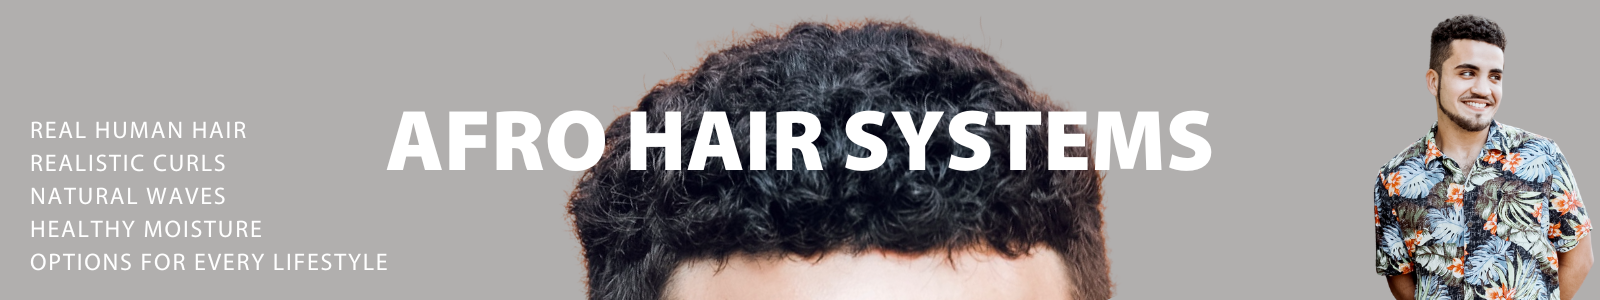 Real Human Hair | Afro Hair Systems | Your Hair Matters | Waves and Curls | Men's Hair Loss | Full Lace | Mono | Thin Skin